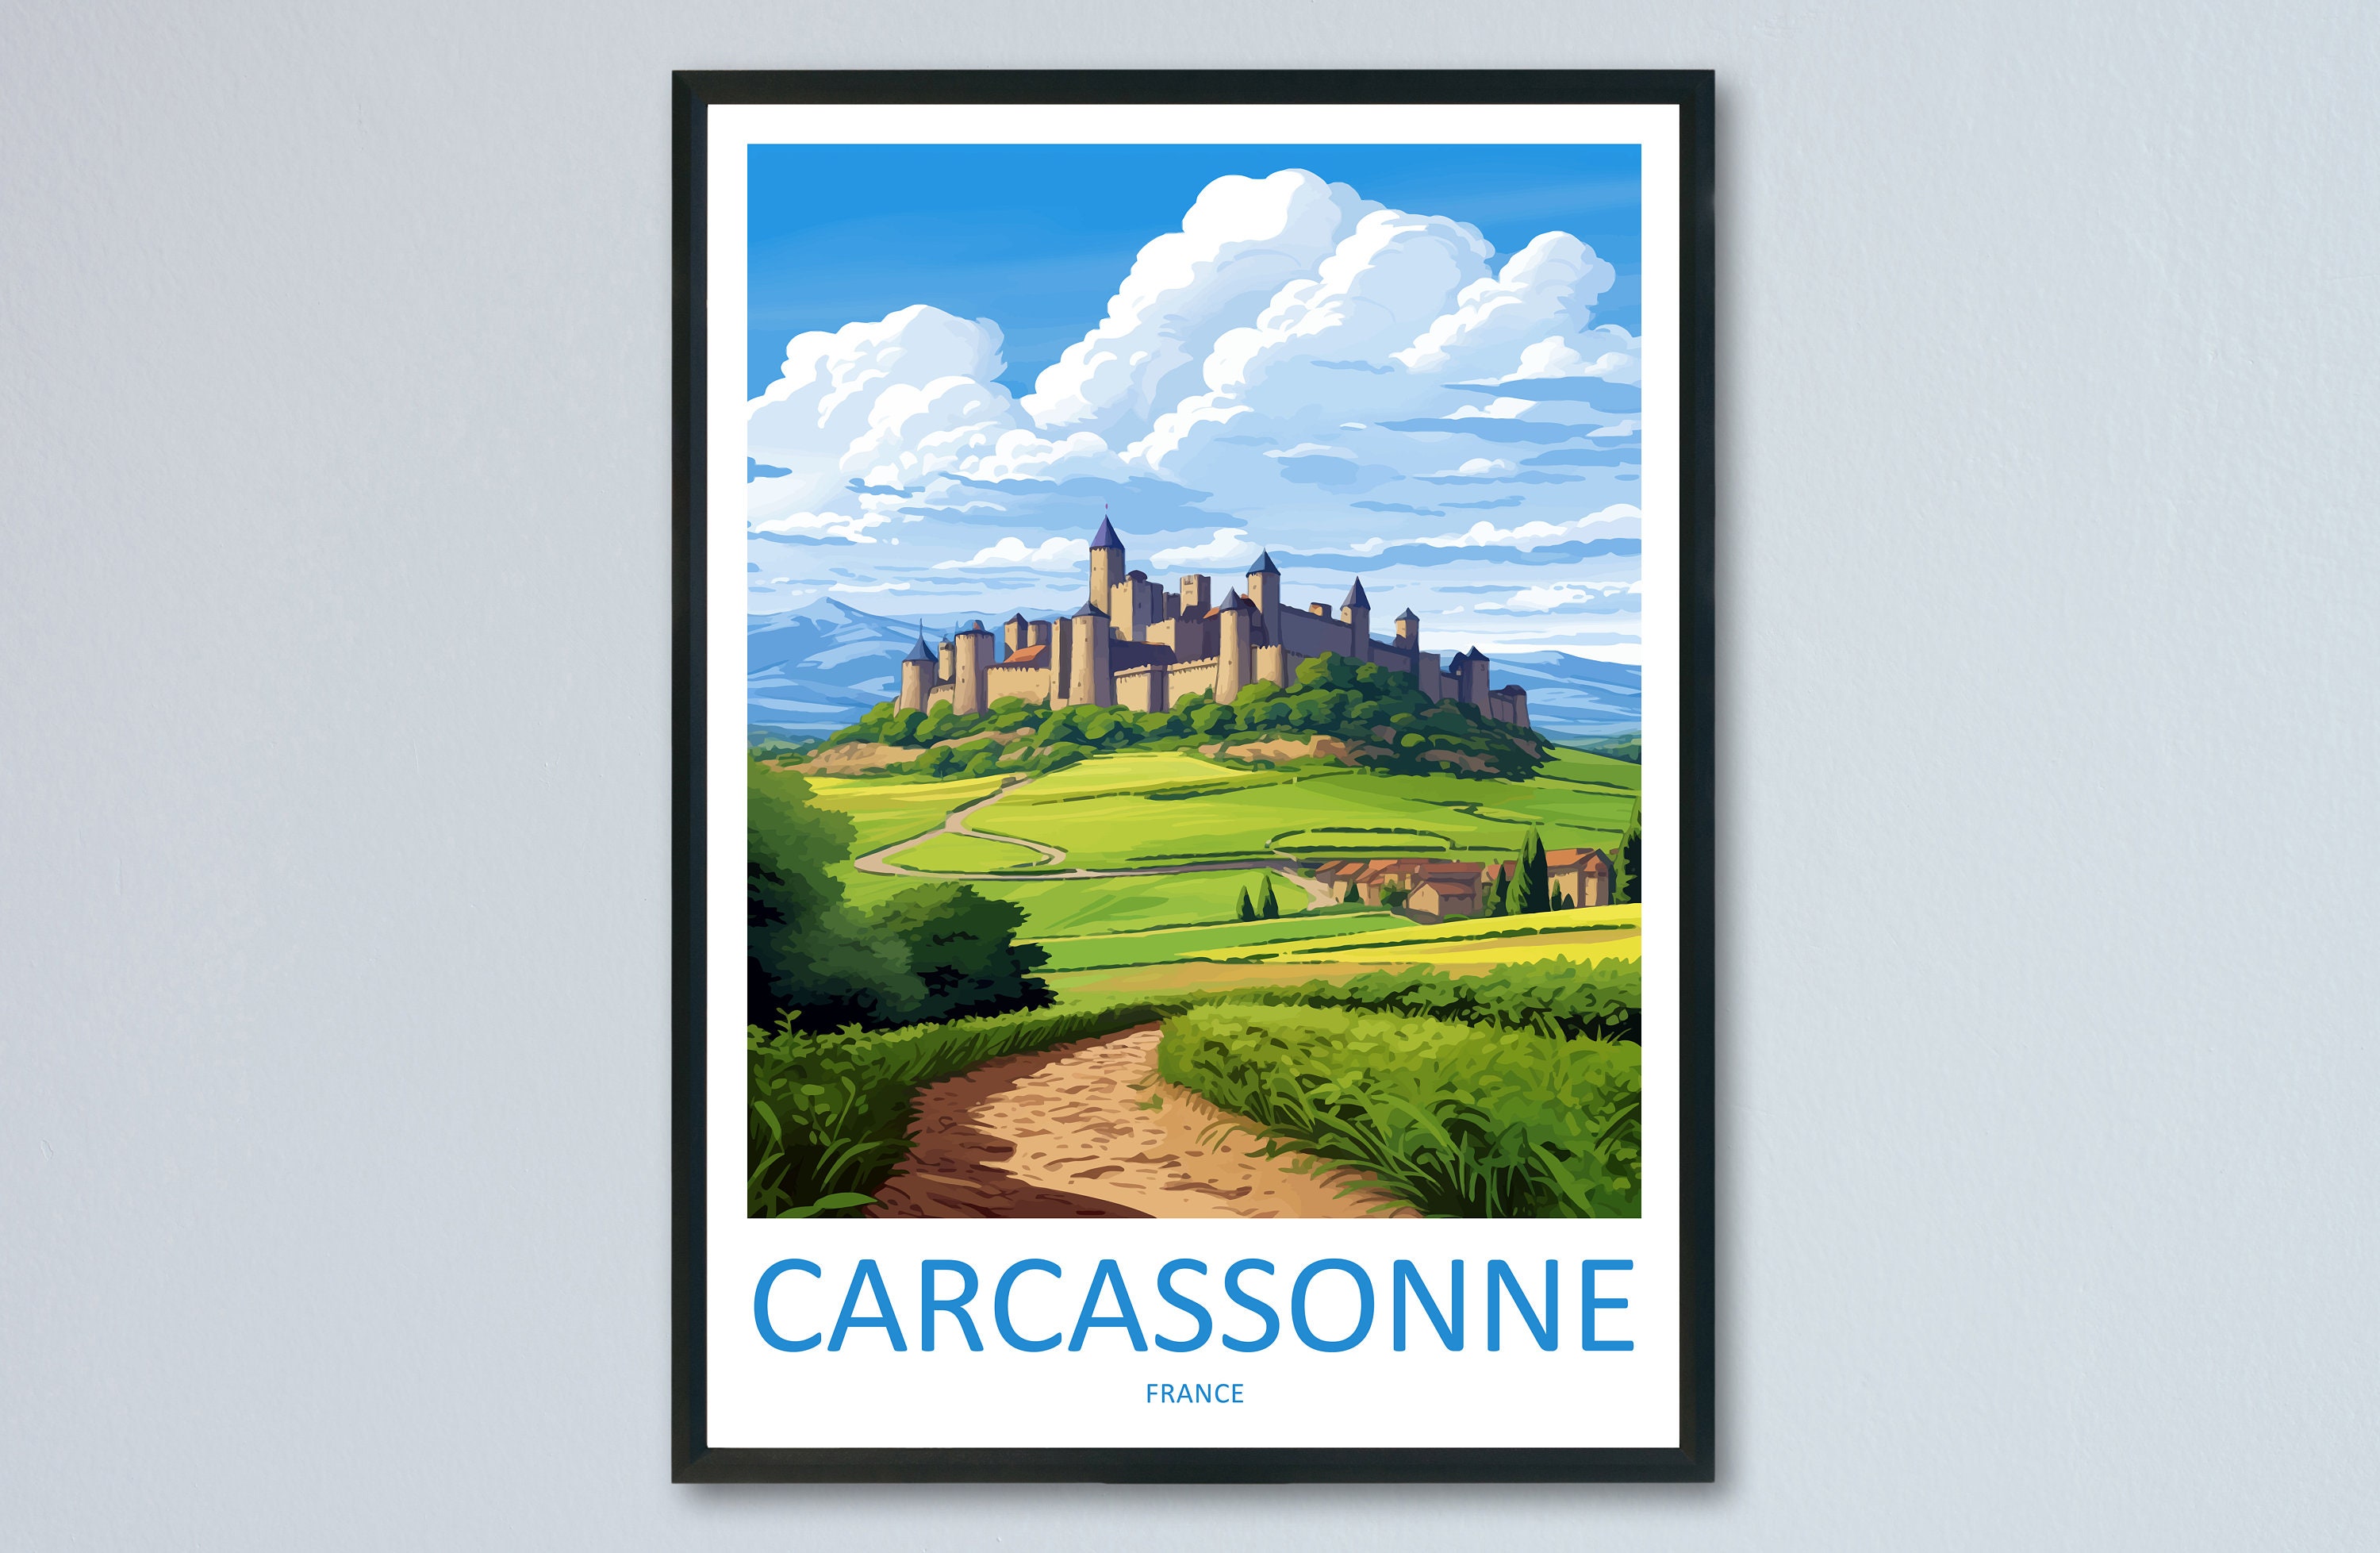 Carcassonne made it into South Park! : r/Carcassonne